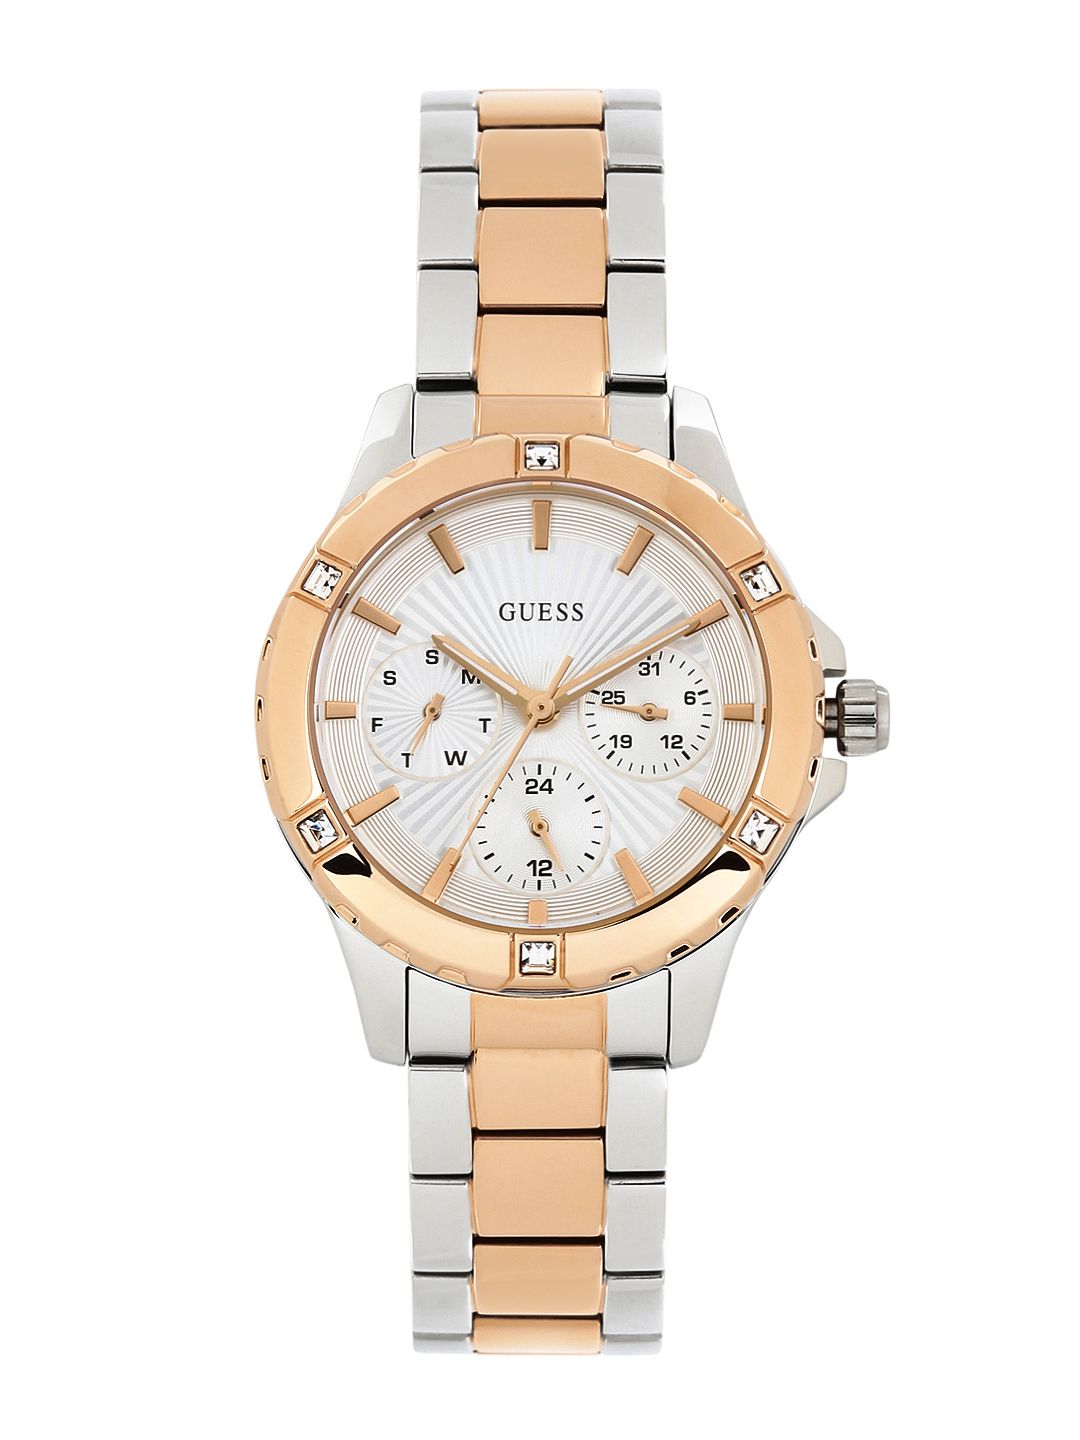 GUESS Women Silver-Toned Dial Watch W0443L4 Price in India